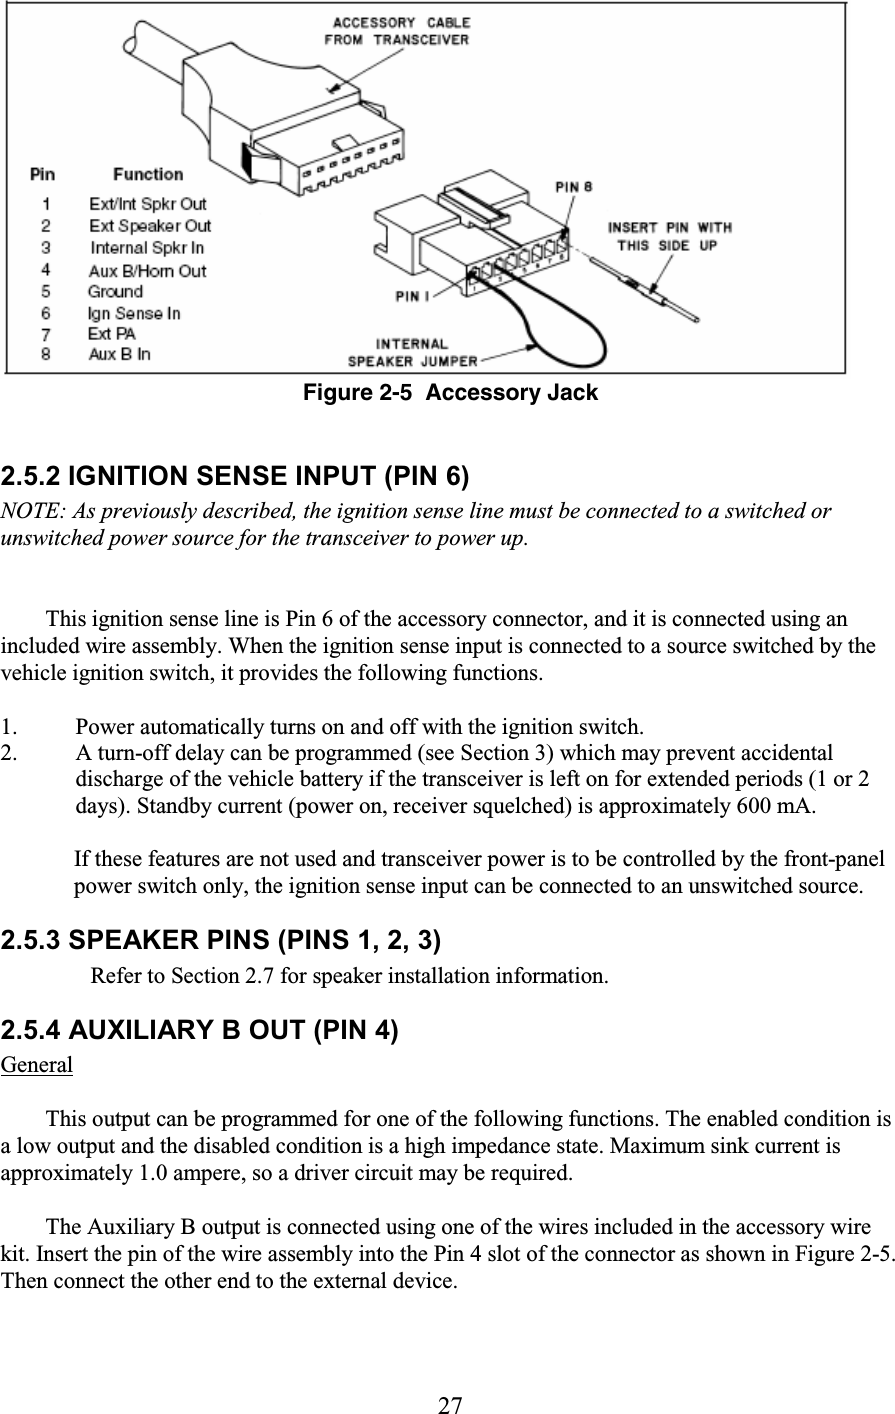 27   Figure 2-5  Accessory Jack  2.5.2 IGNITION SENSE INPUT (PIN 6)  NOTE: As previously described, the ignition sense line must be connected to a switched or unswitched power source for the transceiver to power up.   This ignition sense line is Pin 6 of the accessory connector, and it is connected using an included wire assembly. When the ignition sense input is connected to a source switched by the vehicle ignition switch, it provides the following functions.  1. Power automatically turns on and off with the ignition switch.  2. A turn-off delay can be programmed (see Section 3) which may prevent accidental discharge of the vehicle battery if the transceiver is left on for extended periods (1 or 2 days). Standby current (power on, receiver squelched) is approximately 600 mA.   If these features are not used and transceiver power is to be controlled by the front-panel power switch only, the ignition sense input can be connected to an unswitched source.  2.5.3 SPEAKER PINS (PINS 1, 2, 3)  Refer to Section 2.7 for speaker installation information.  2.5.4 AUXILIARY B OUT (PIN 4)  General  This output can be programmed for one of the following functions. The enabled condition is a low output and the disabled condition is a high impedance state. Maximum sink current is approximately 1.0 ampere, so a driver circuit may be required.  The Auxiliary B output is connected using one of the wires included in the accessory wire kit. Insert the pin of the wire assembly into the Pin 4 slot of the connector as shown in Figure 2-5. Then connect the other end to the external device.  